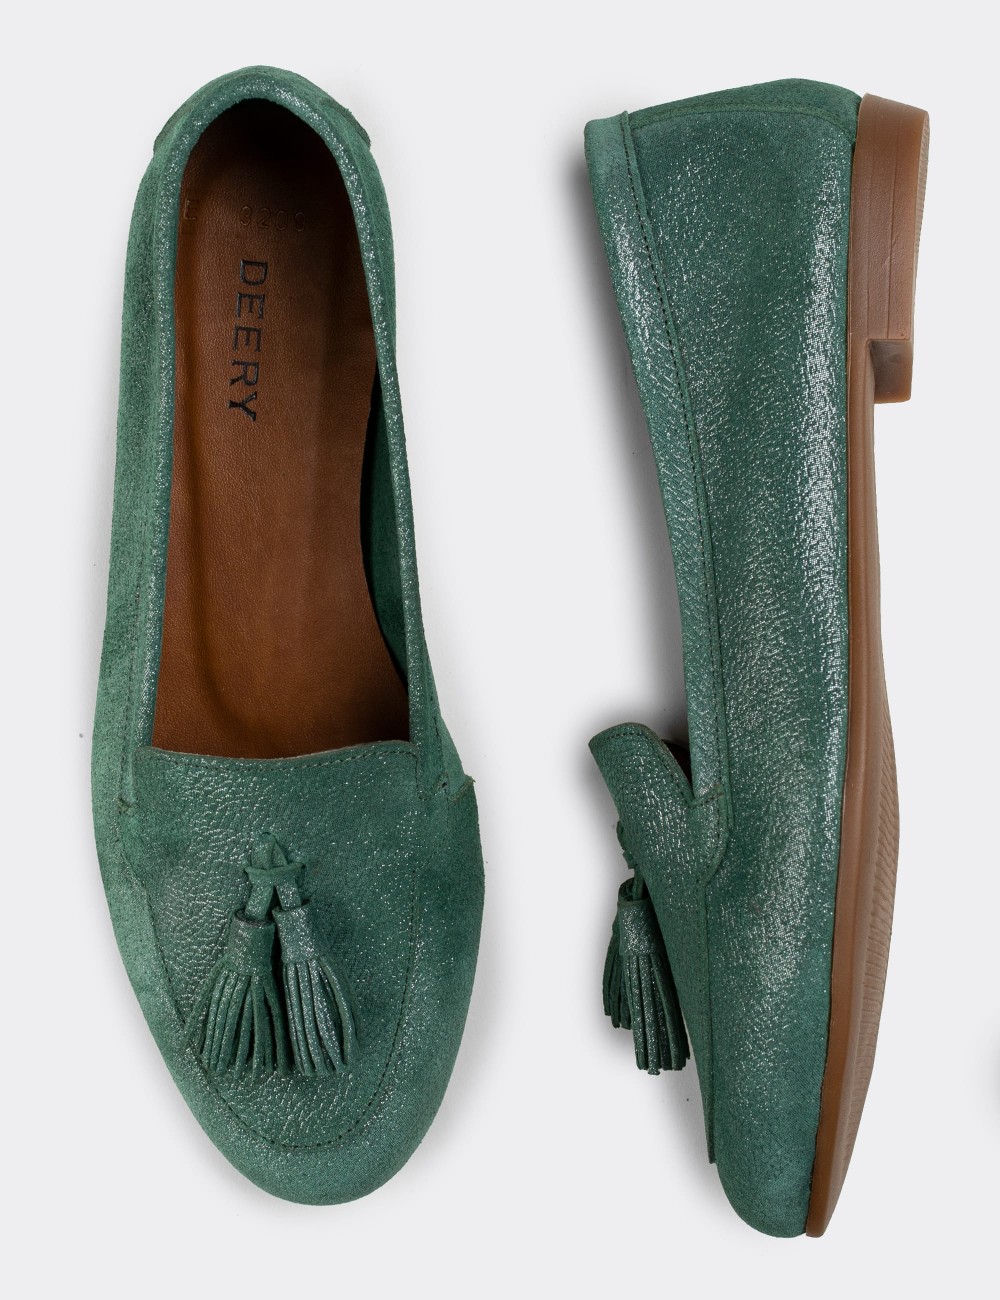 Green Suede Leather Loafers - E3209ZYSLC01